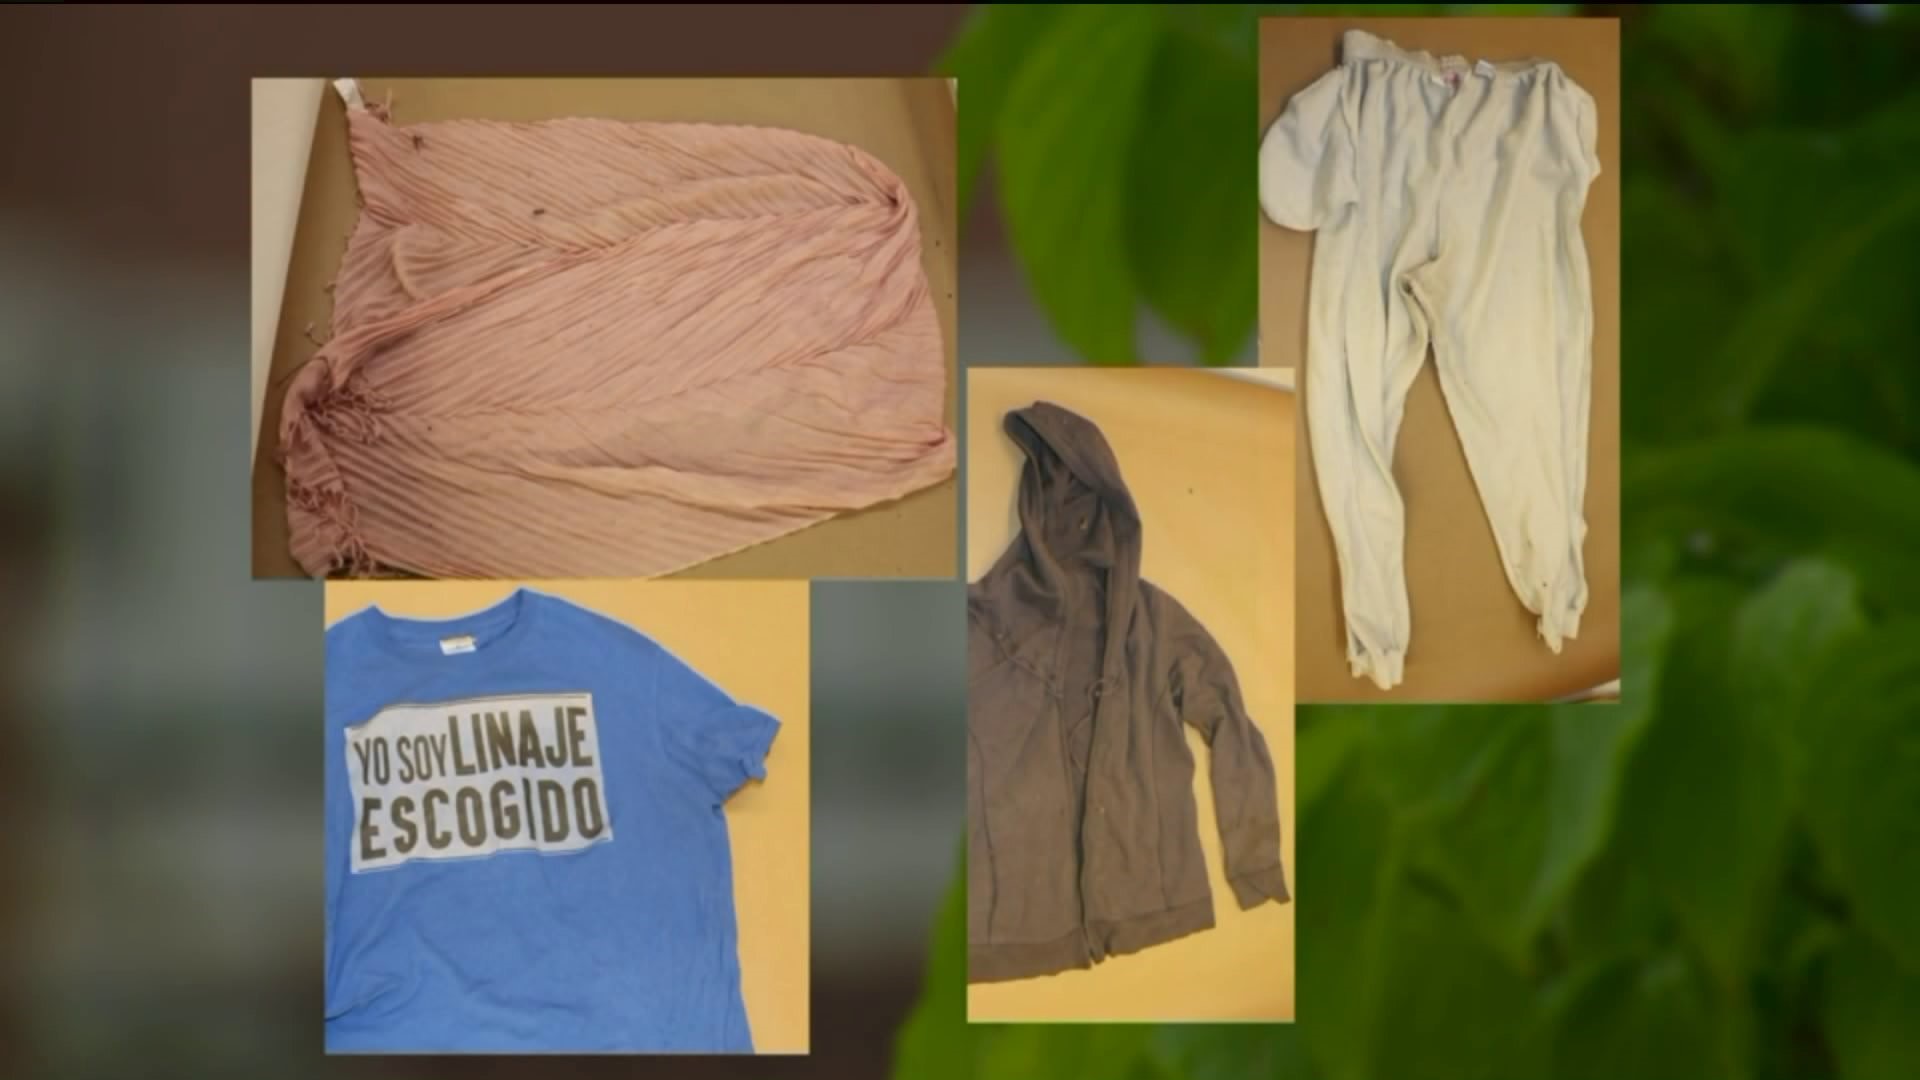 Photos released of clothing found on abandoned infant in Danbury Sunday